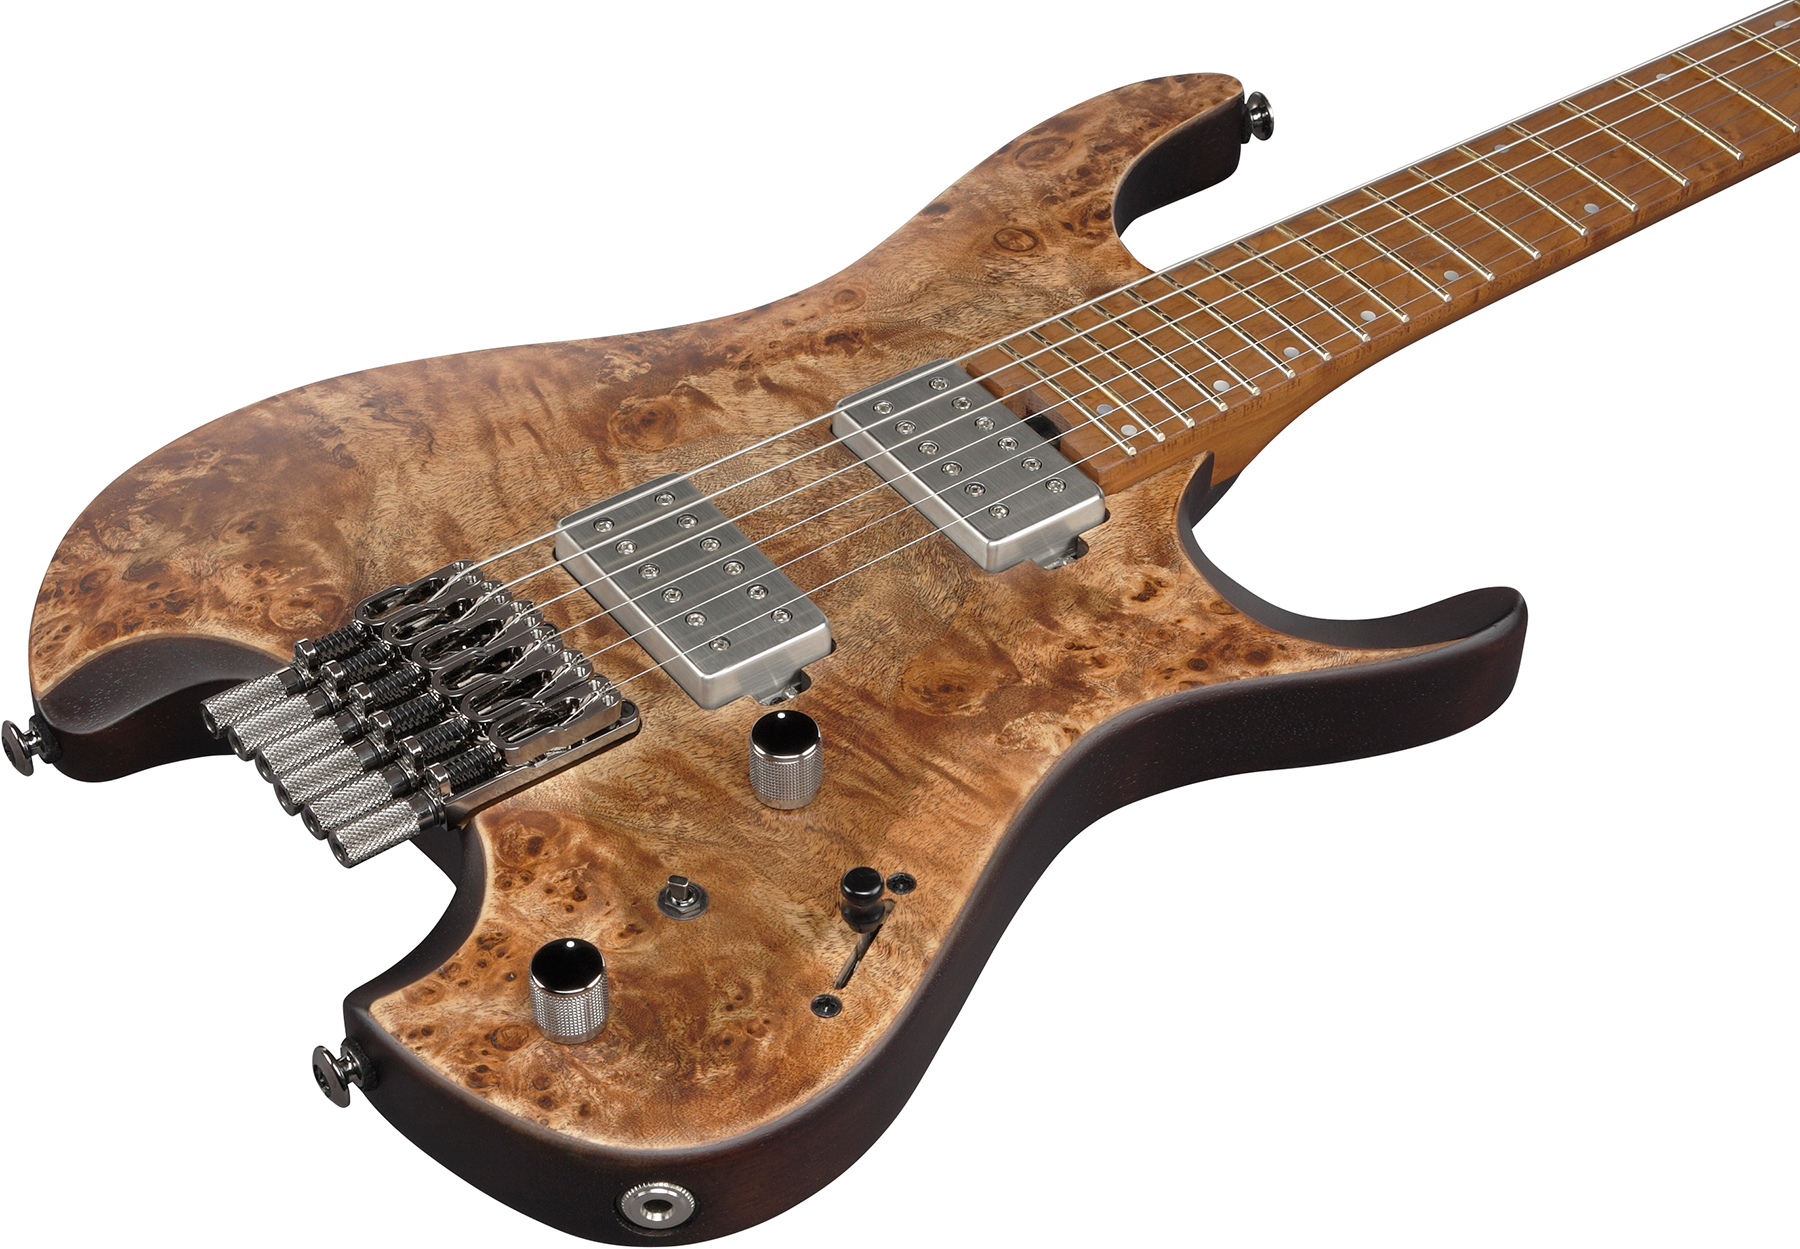 Ibanez Q52pb Abs Quest 2h Ht Mn - Antique Brown Stained - Guitarra electrica metalica - Variation 2